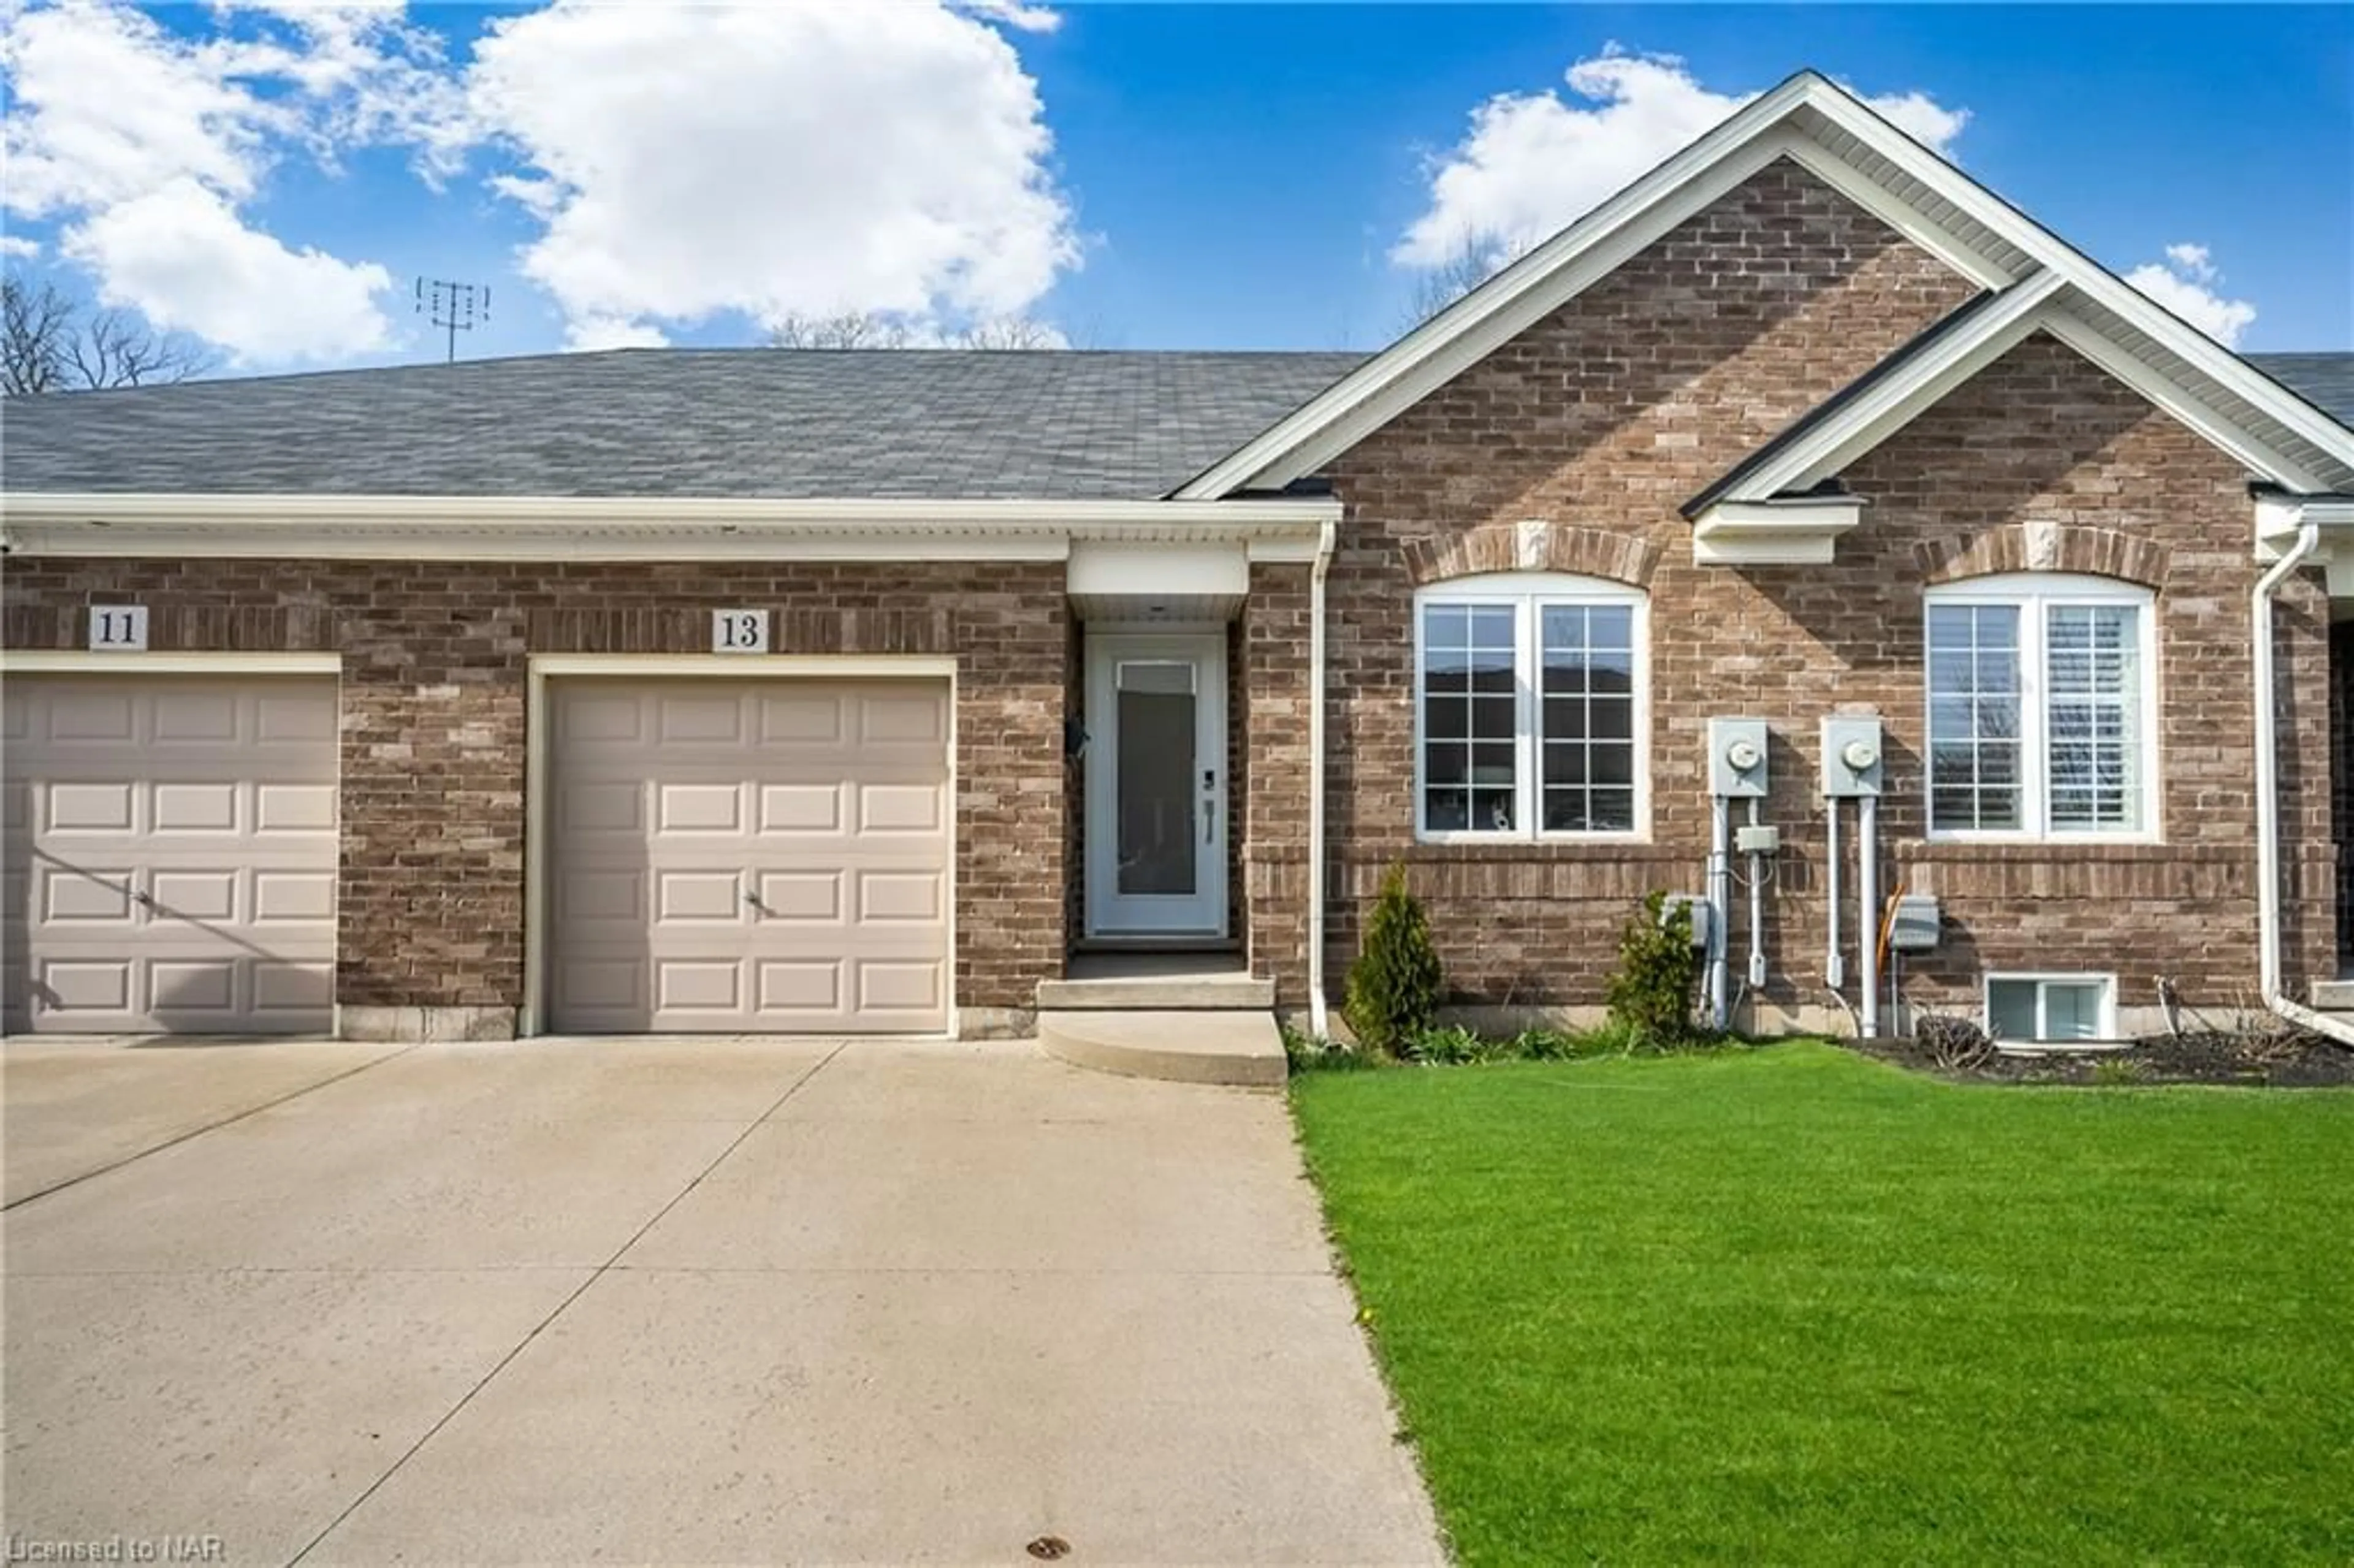 Home with brick exterior material for 13 Avery Cres, St. Catharines Ontario L2P 0B7